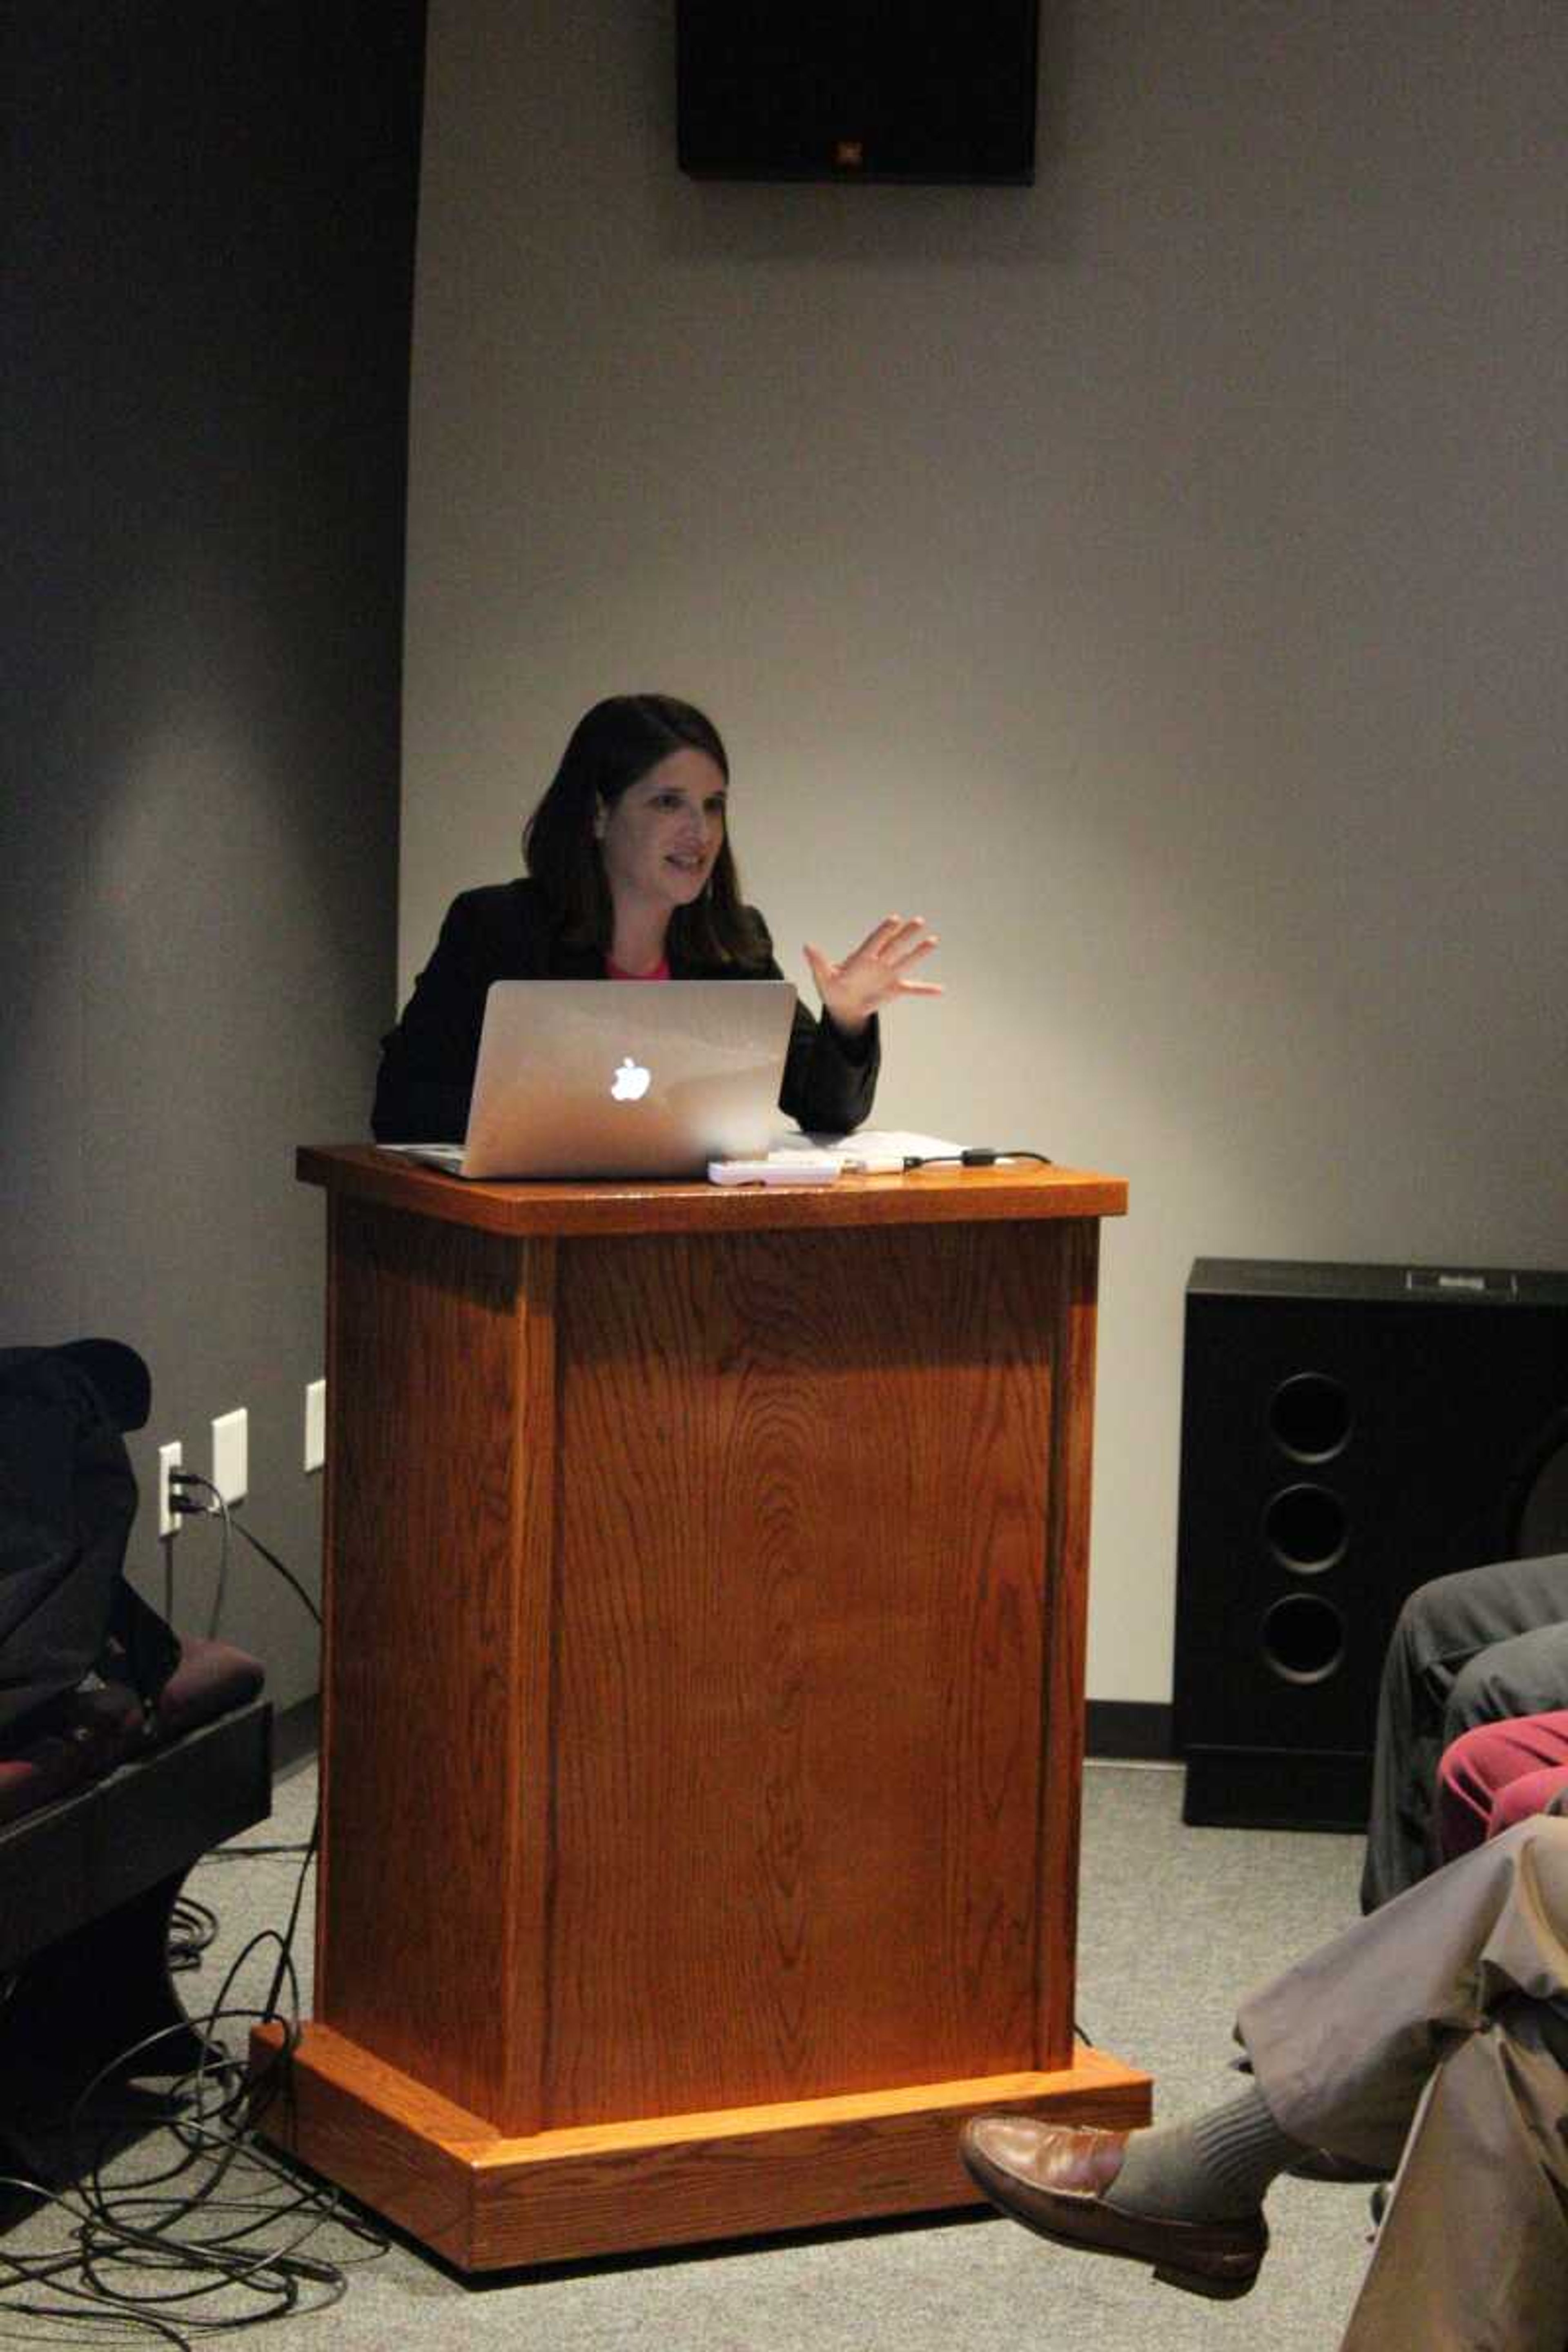 Dr.Lily Santoro addressing the audience during her lecture at Crisp Museum